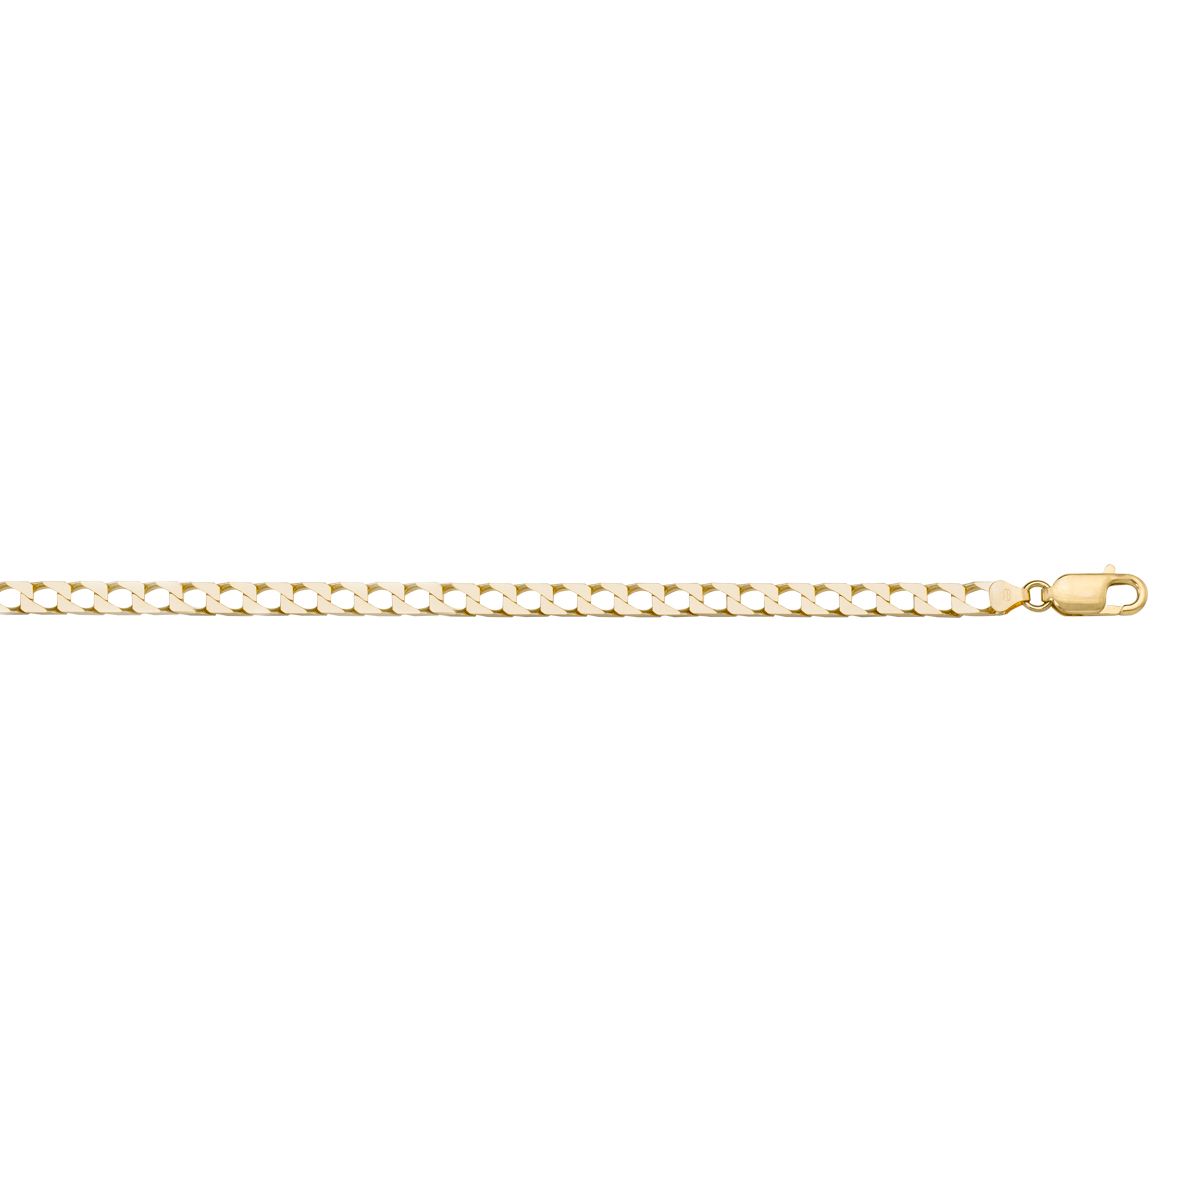 CCRB05, Gold Bracelet, Squared Curb, Yellow Gold